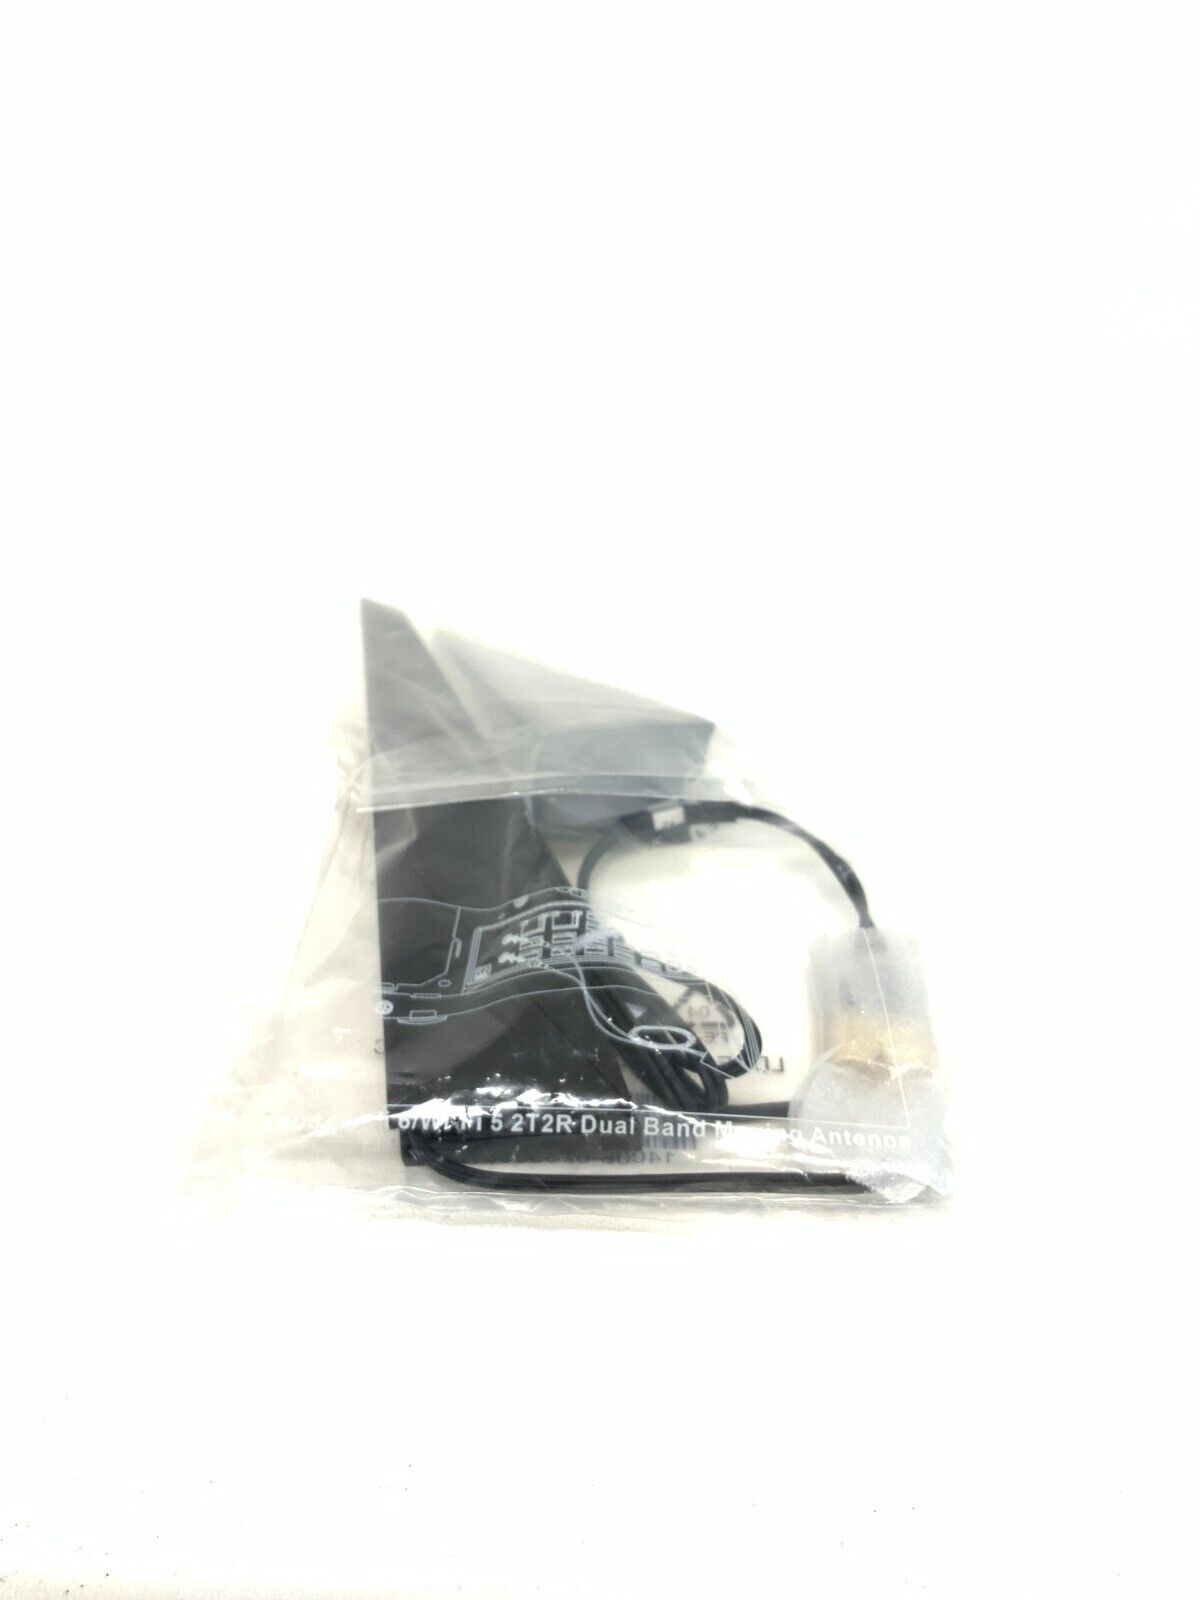 ASUS 2T2R Dual Band WIFI ANTENNA 2.4GHz 5.0GHz Brand New Sealed